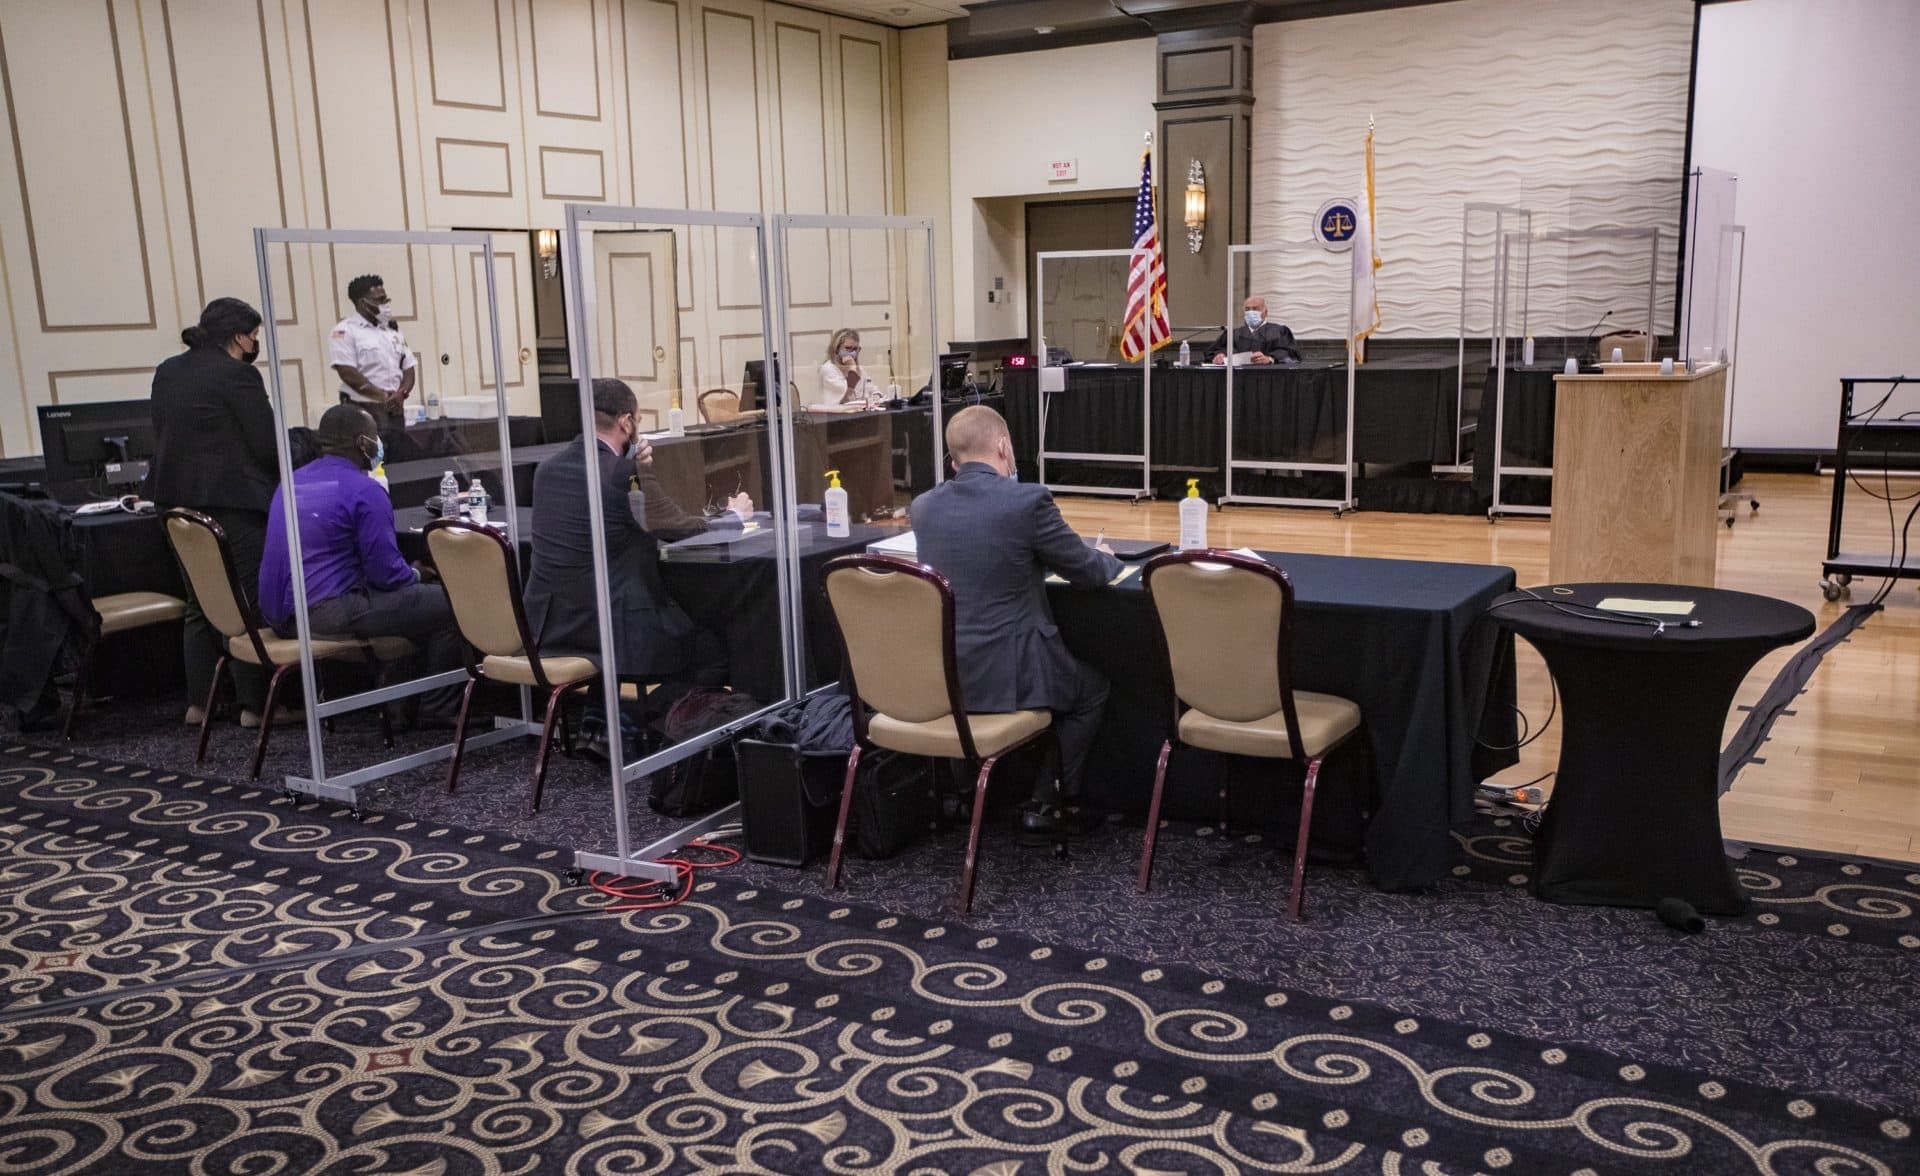 A Norfolk District court case resumes in a function hall at Lombardo’s in Randolph. (Jesse Costa/WBUR)